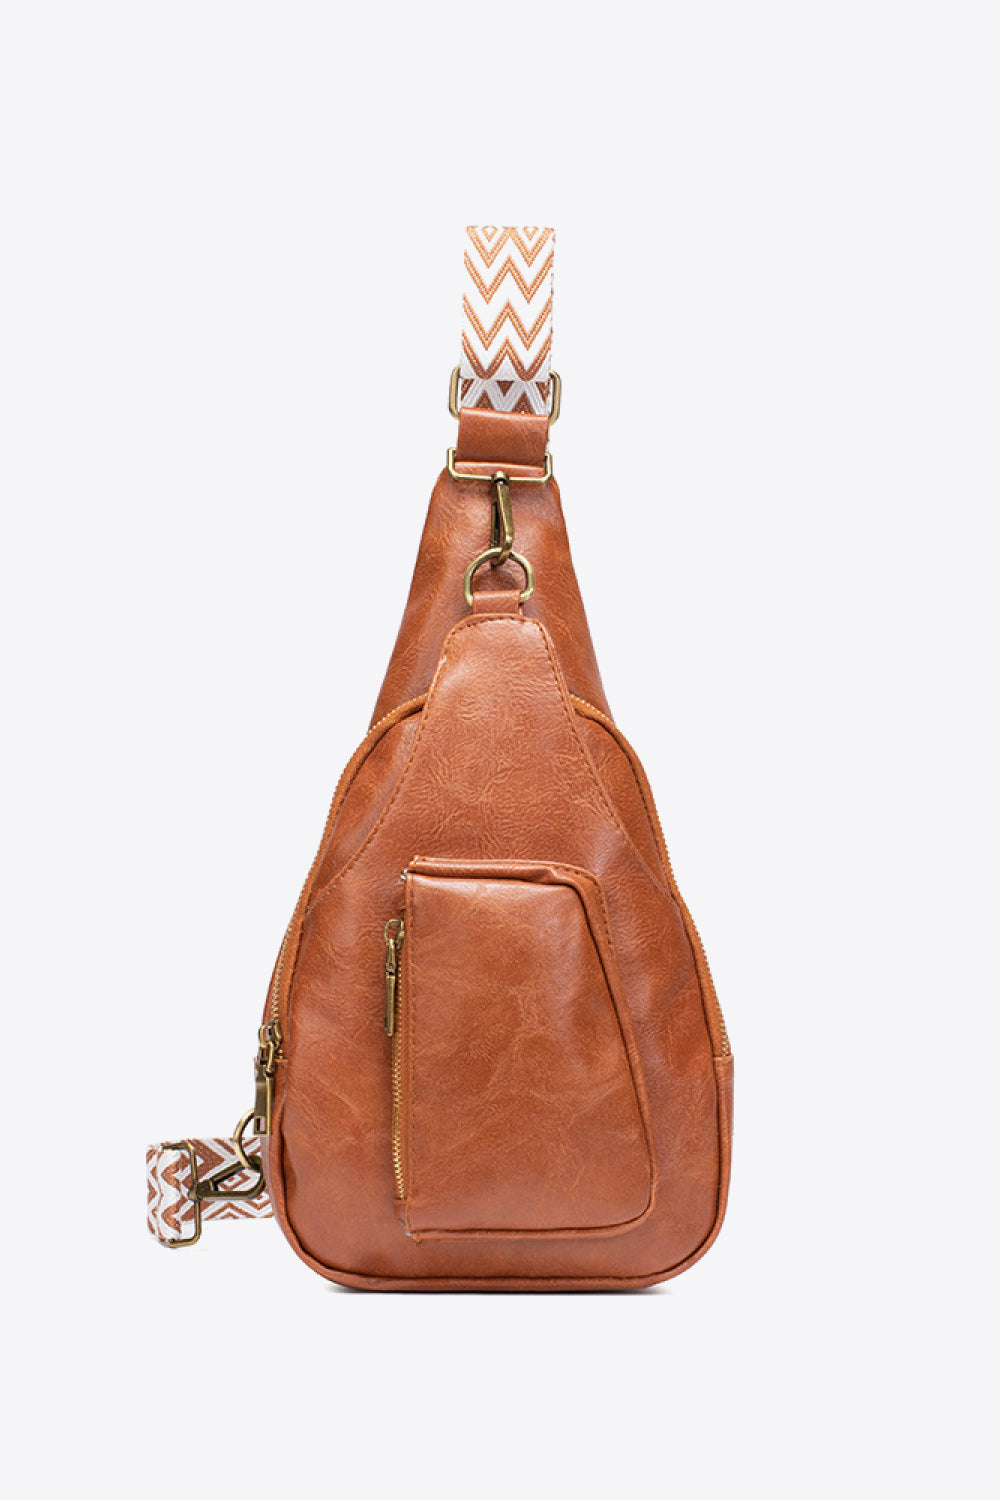 All The Feels PU Leather Sling Bag | BAGS & ACCESSORIES | Bags, Bags & Luggage, C&W, Ship From Overseas, sling bags | Trendsi